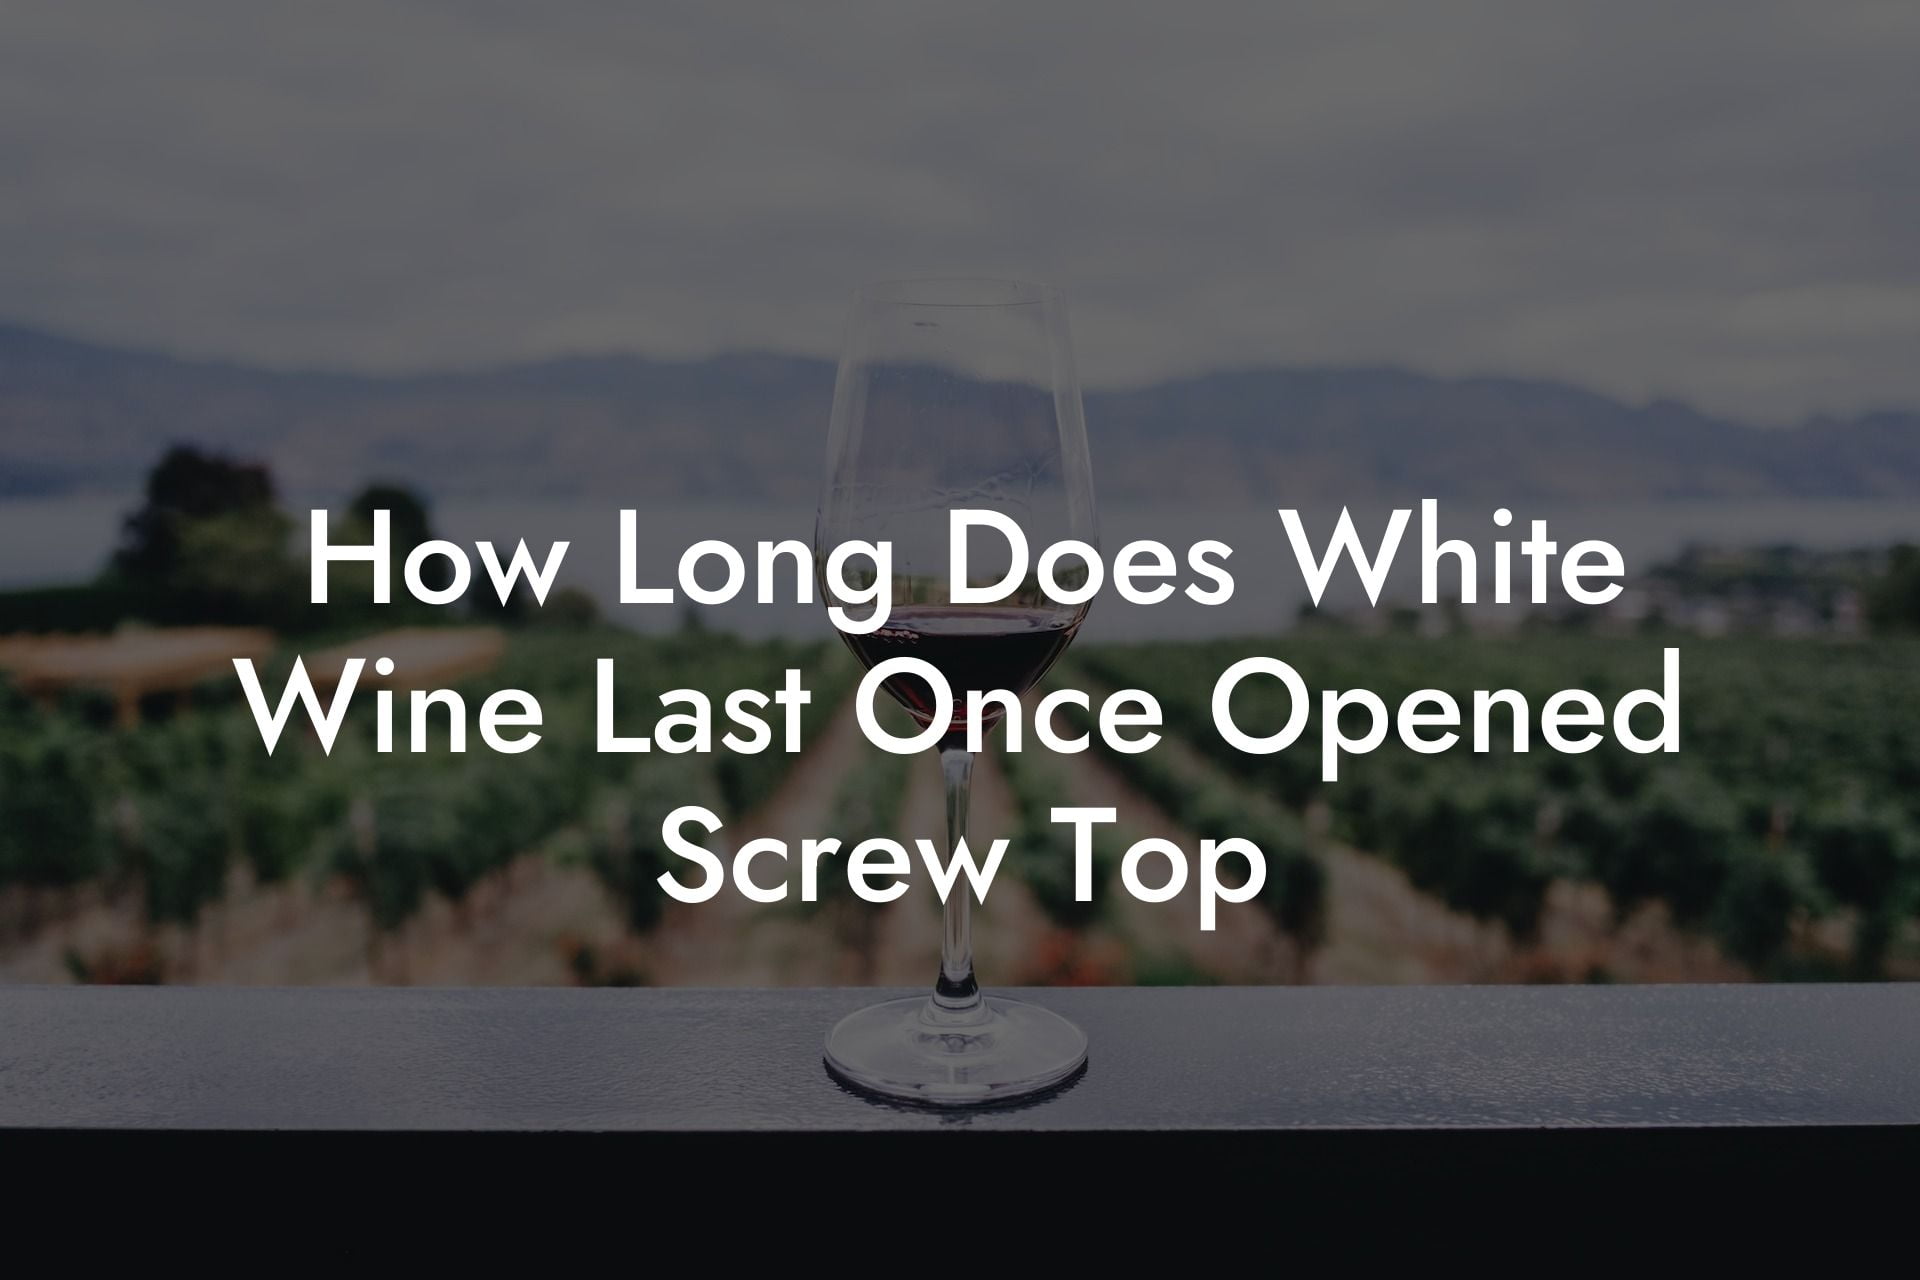 How Long Does White Wine Last Once Opened Screw Top